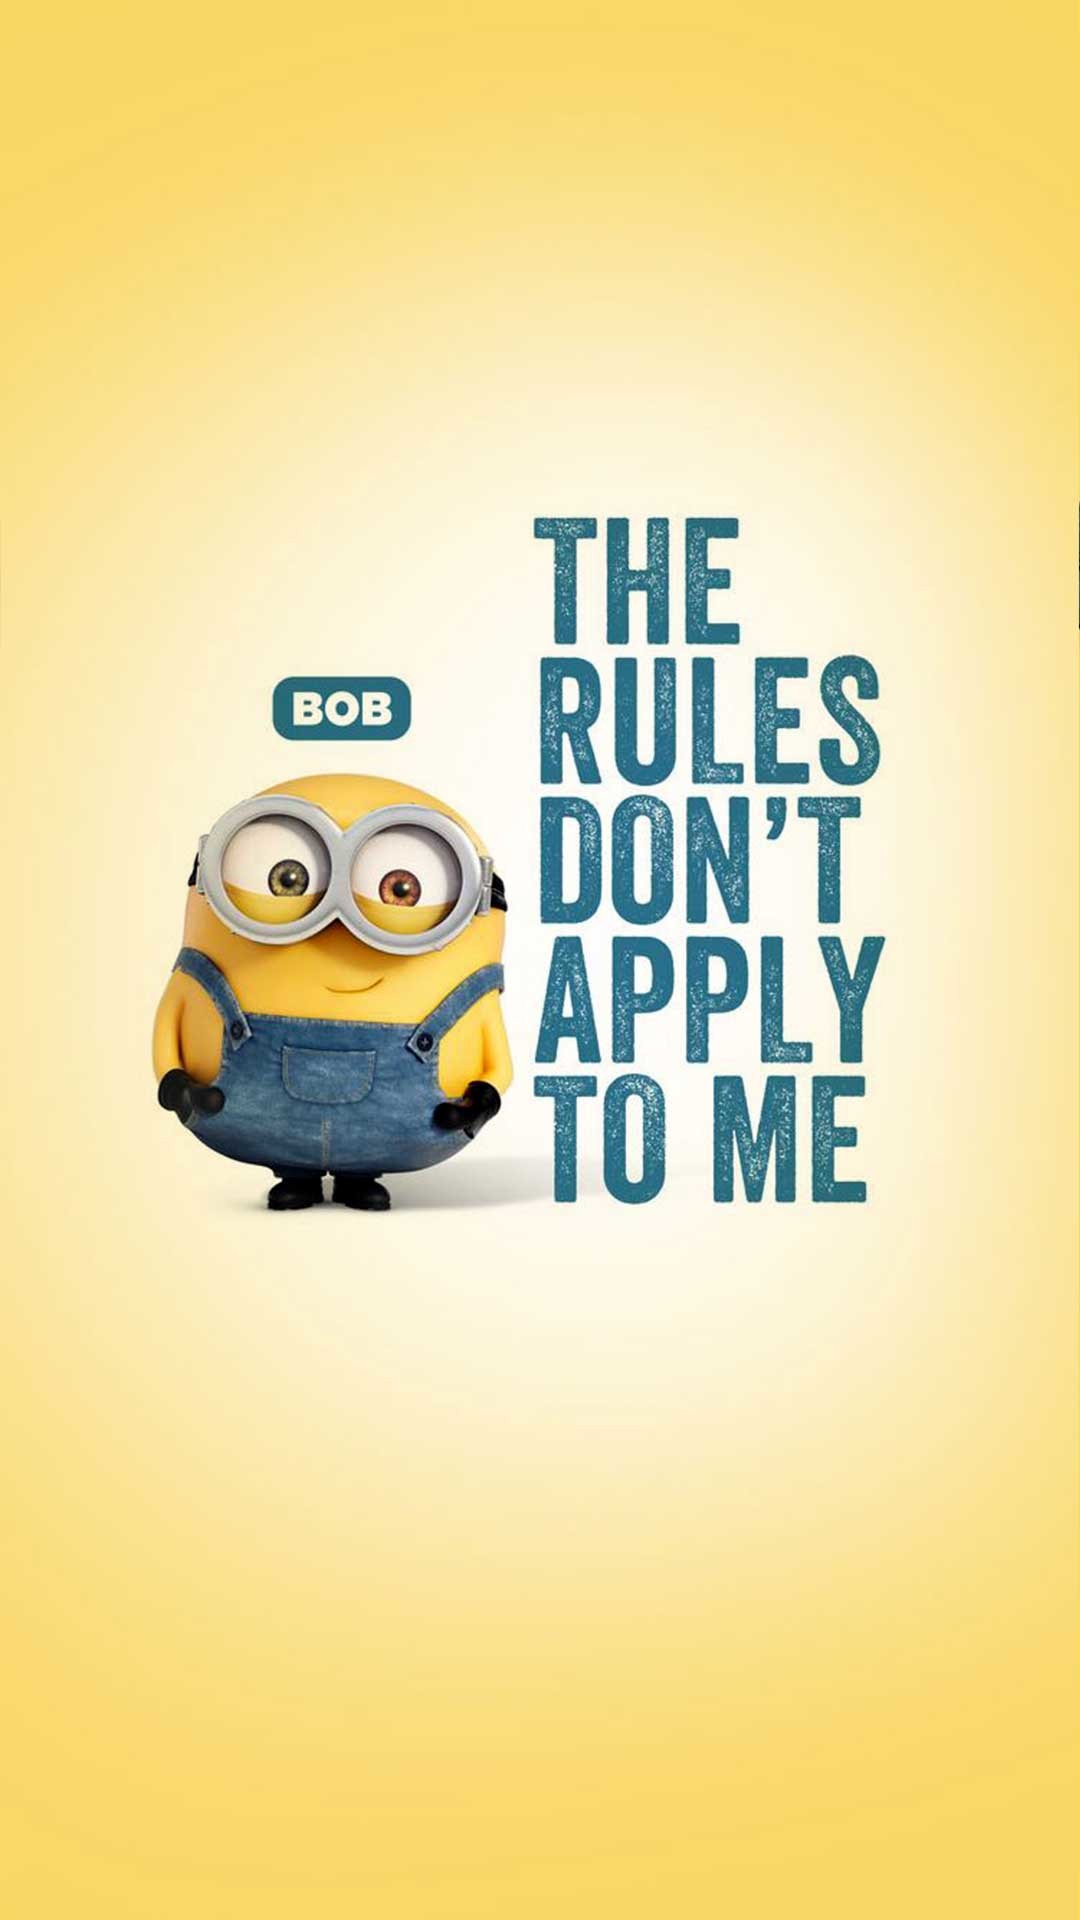 1080x1920 3d Minion Wallpaper for IOS. best iphone background